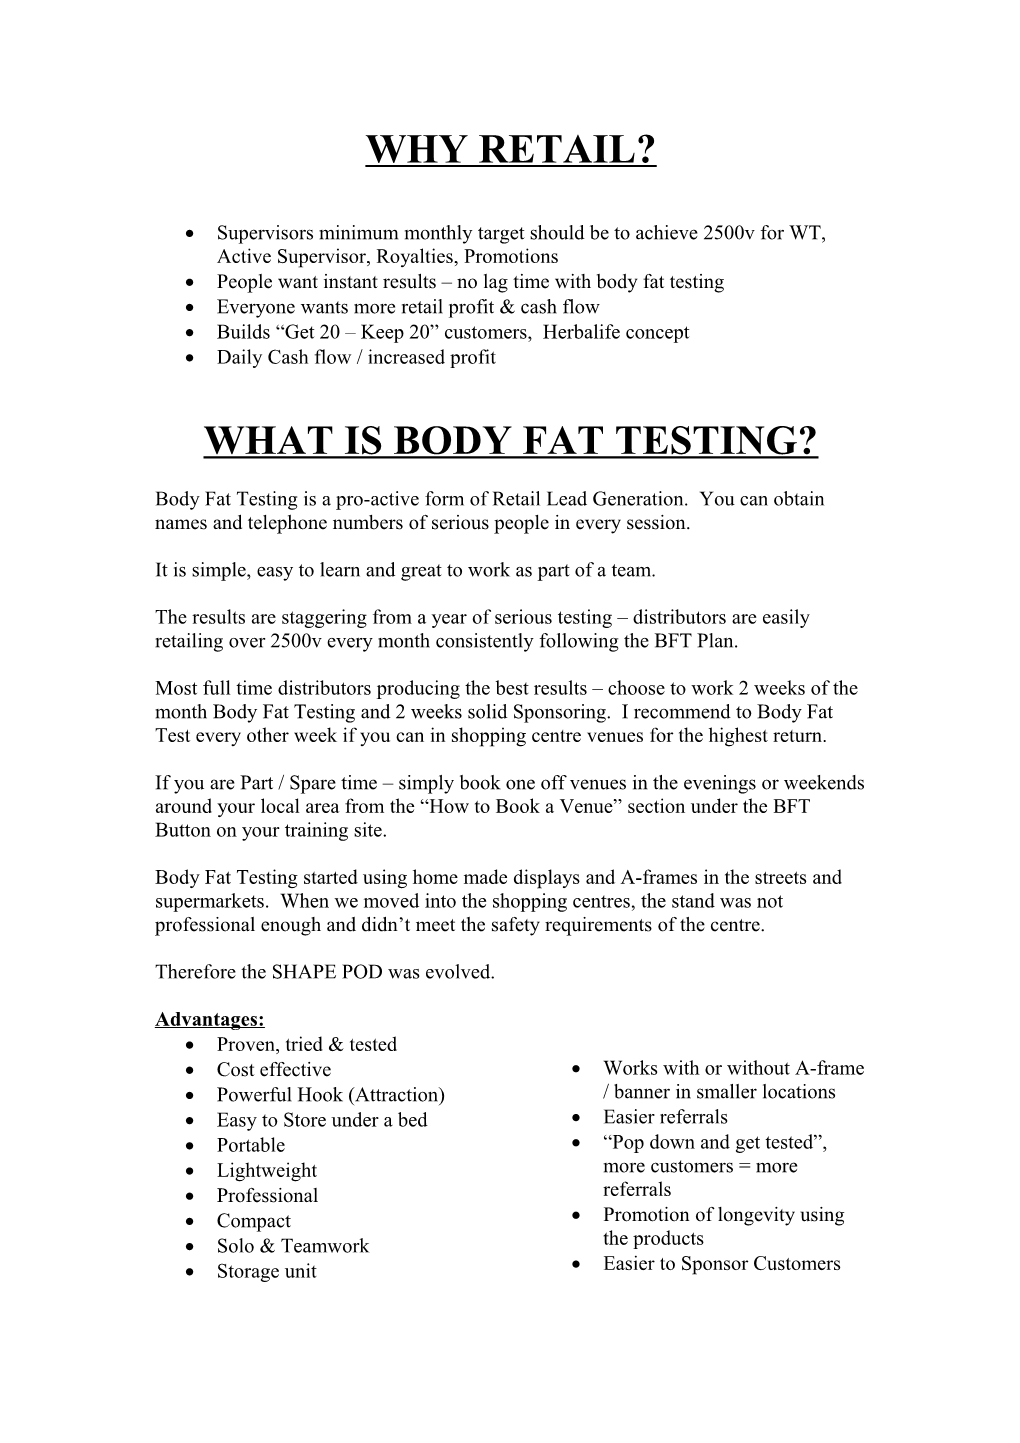 What Is Body Fat Testing?